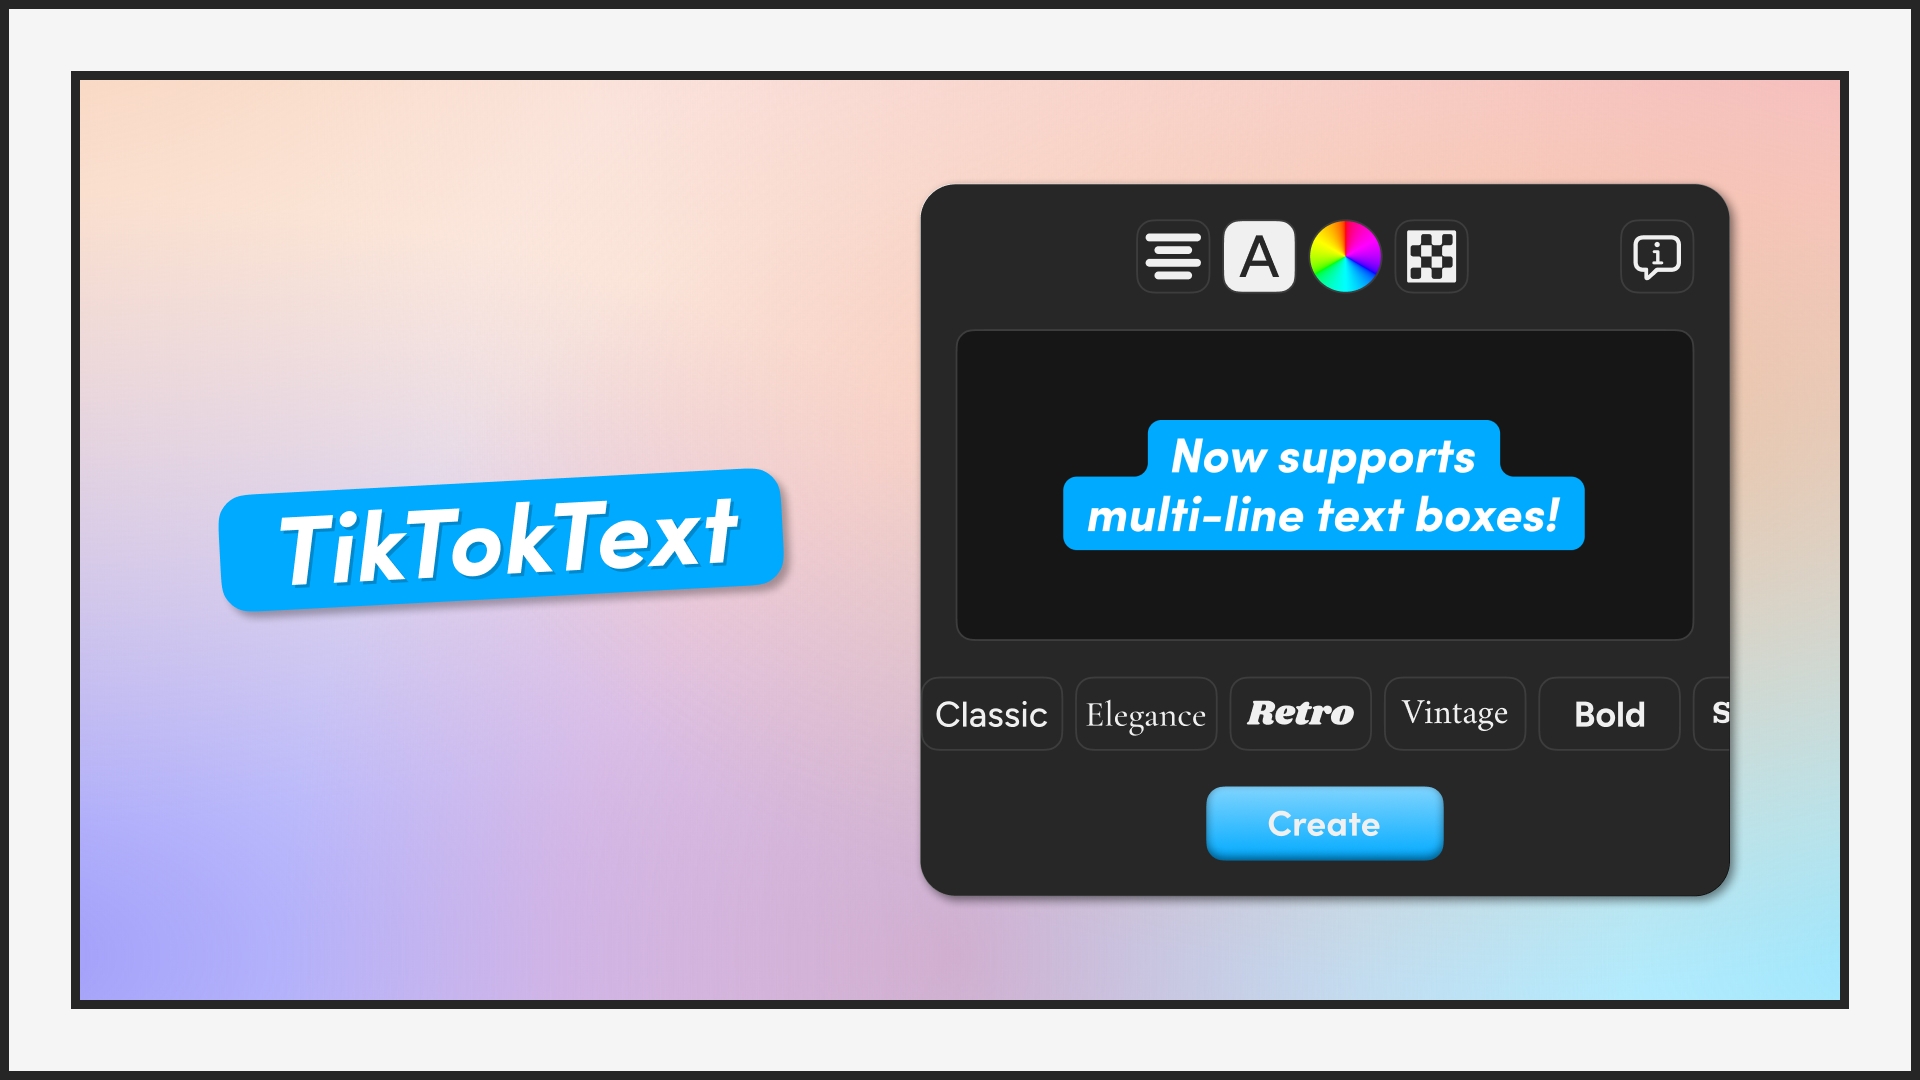 Now supports multi-line text boxes